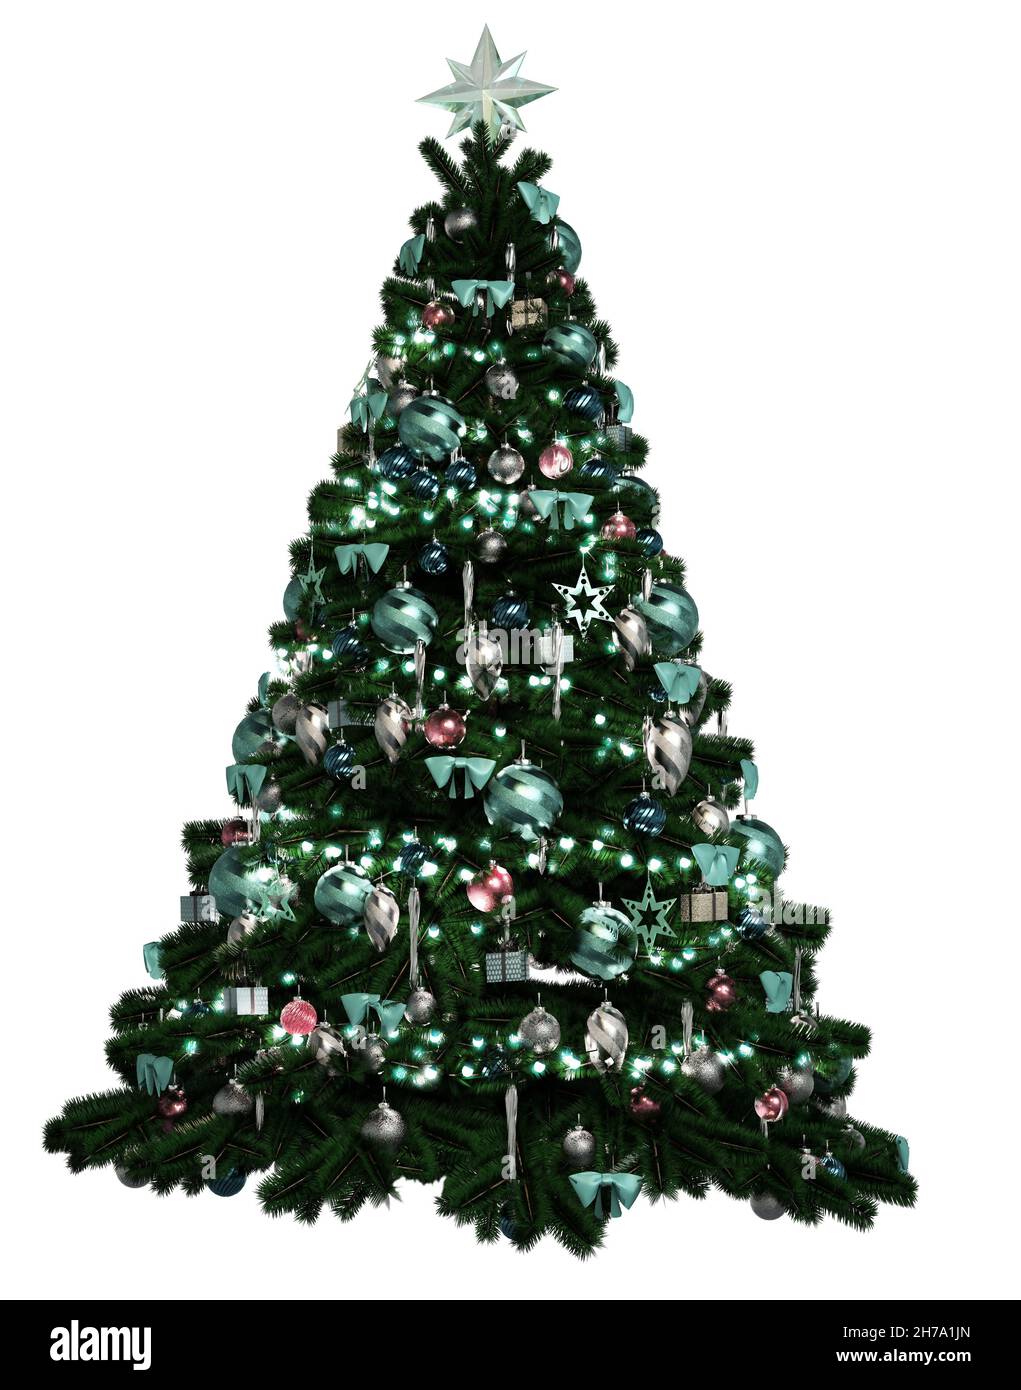 3d computer graphics of a traditionally decorated Christmas tree Stock Photo